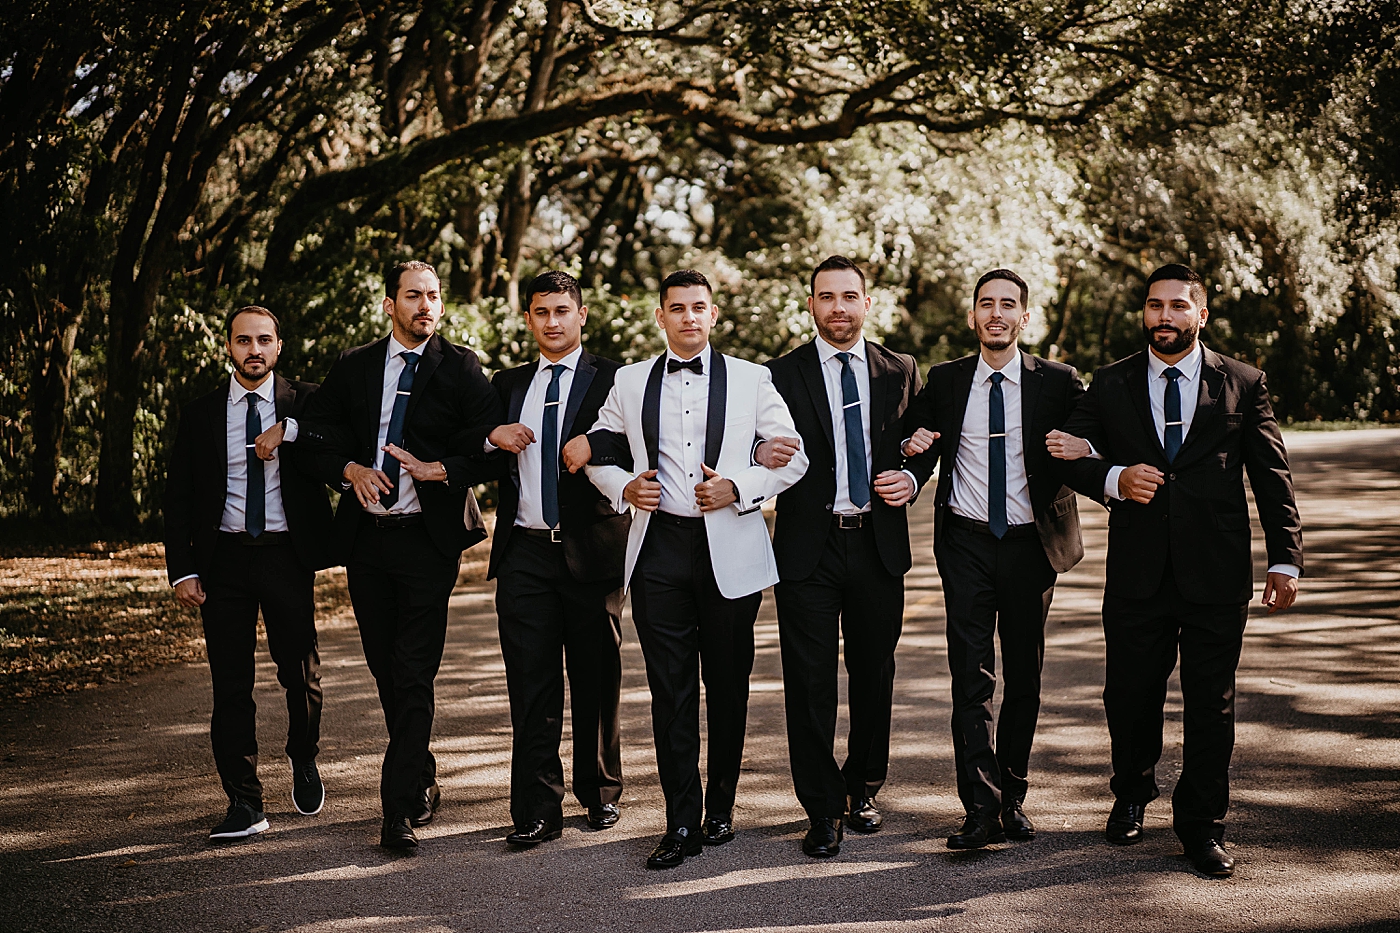 Groom with Groomsmen having their arms intertwined Lavan Venue Wedding Photography captured by South Florida Wedding Photographer Krystal Capone Photography